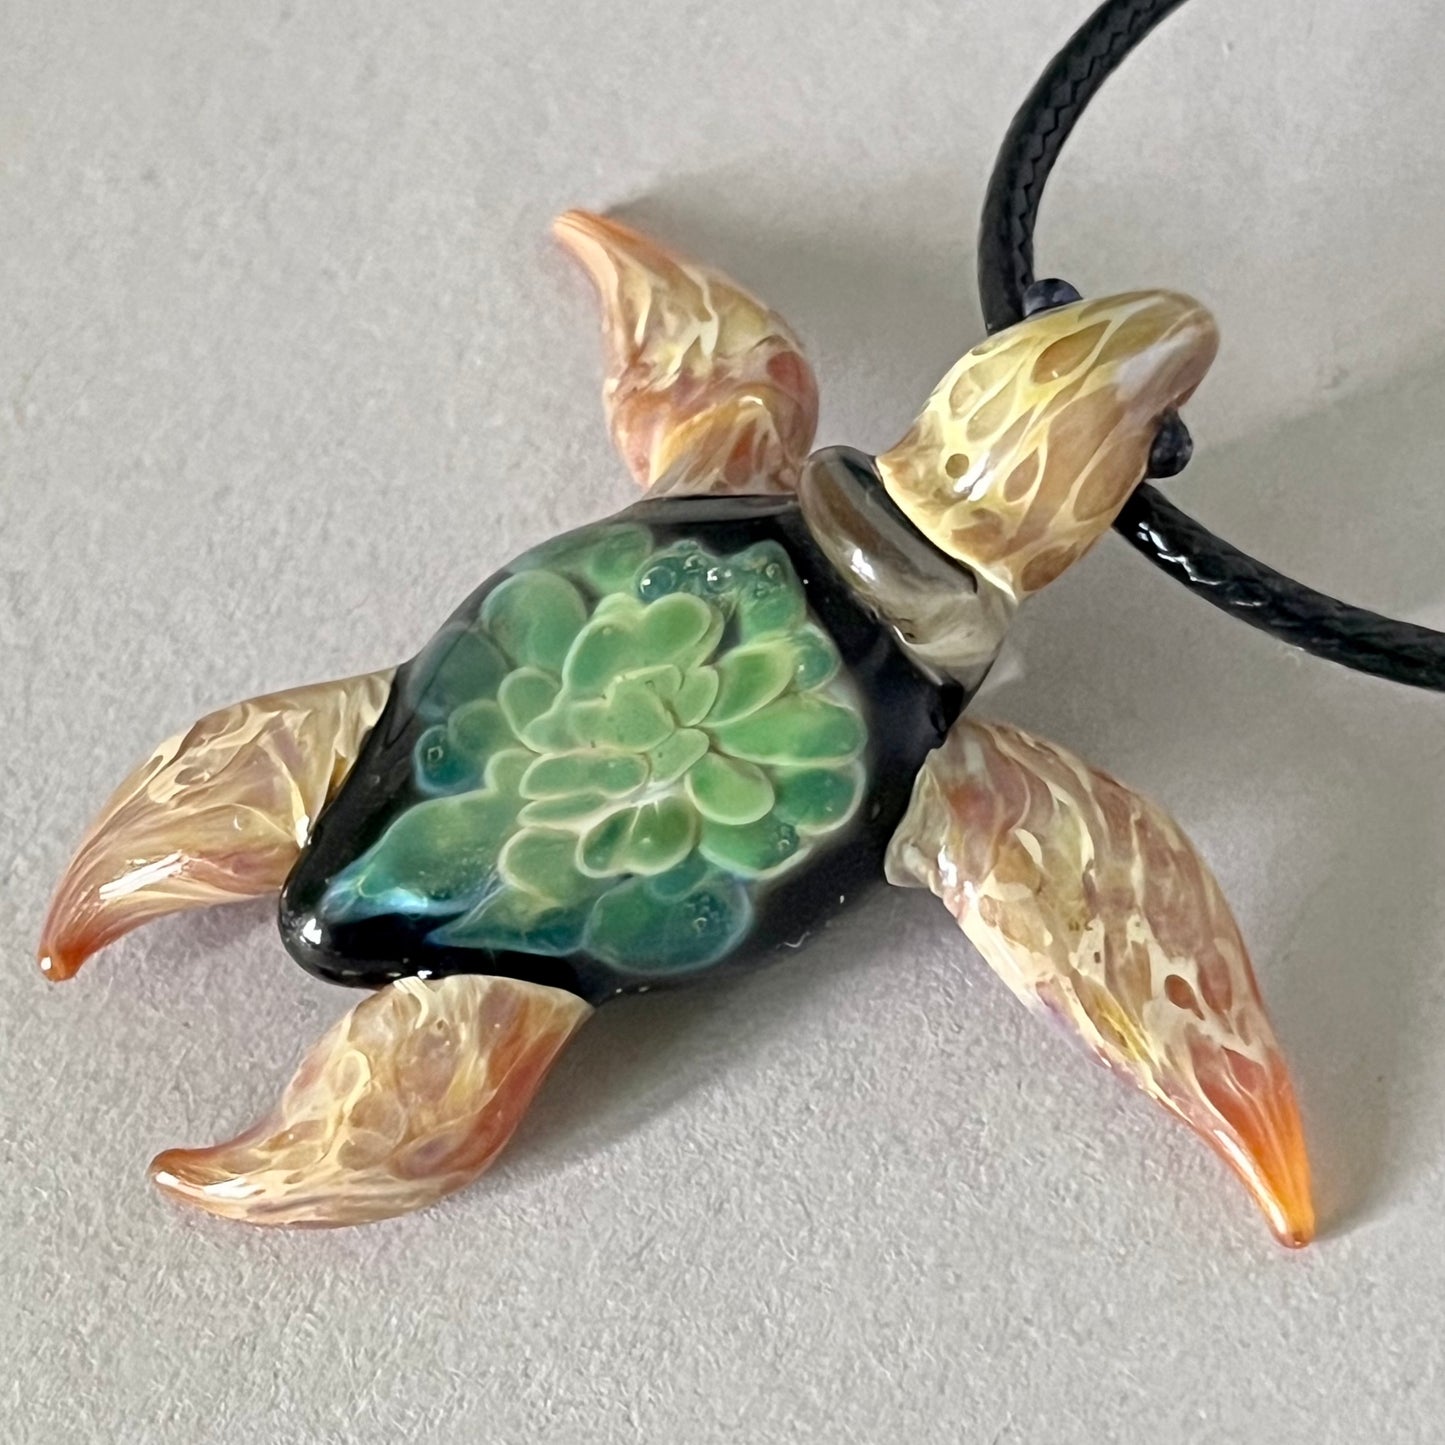 Exquisite Hawaiian Sea Turtle: Handcrafted Glass Pendant with Coral Reef Inside the Shell